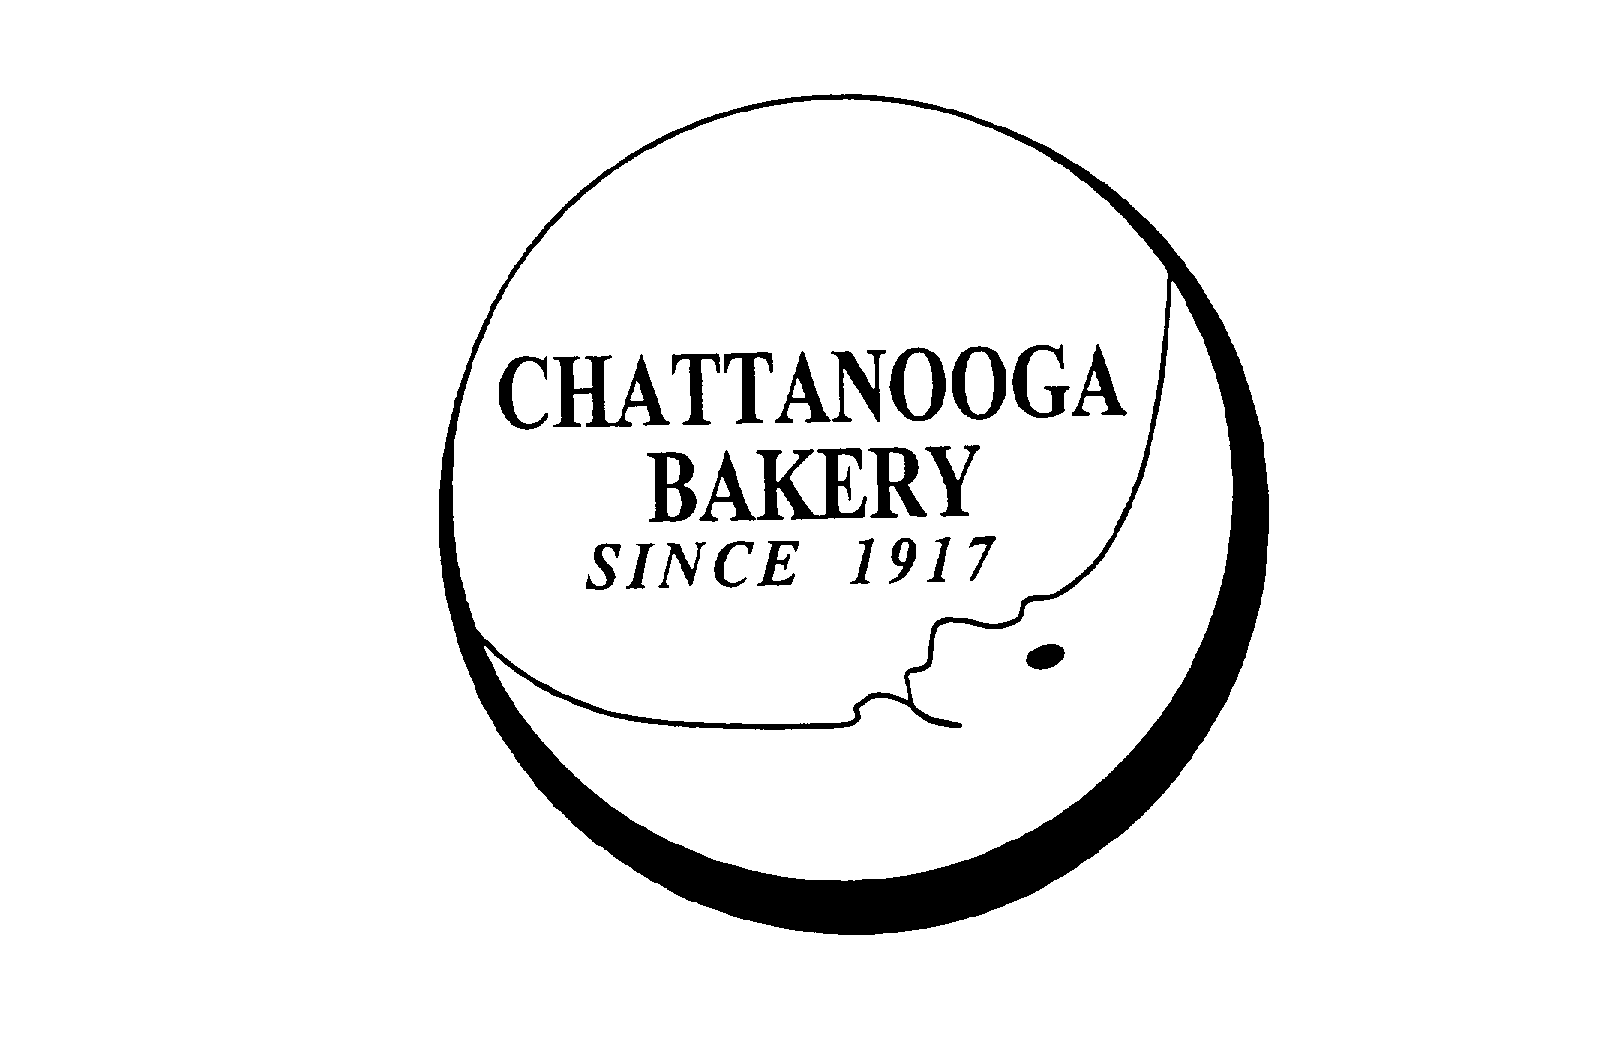  CHATTANOOGA BAKERY SINCE 1917